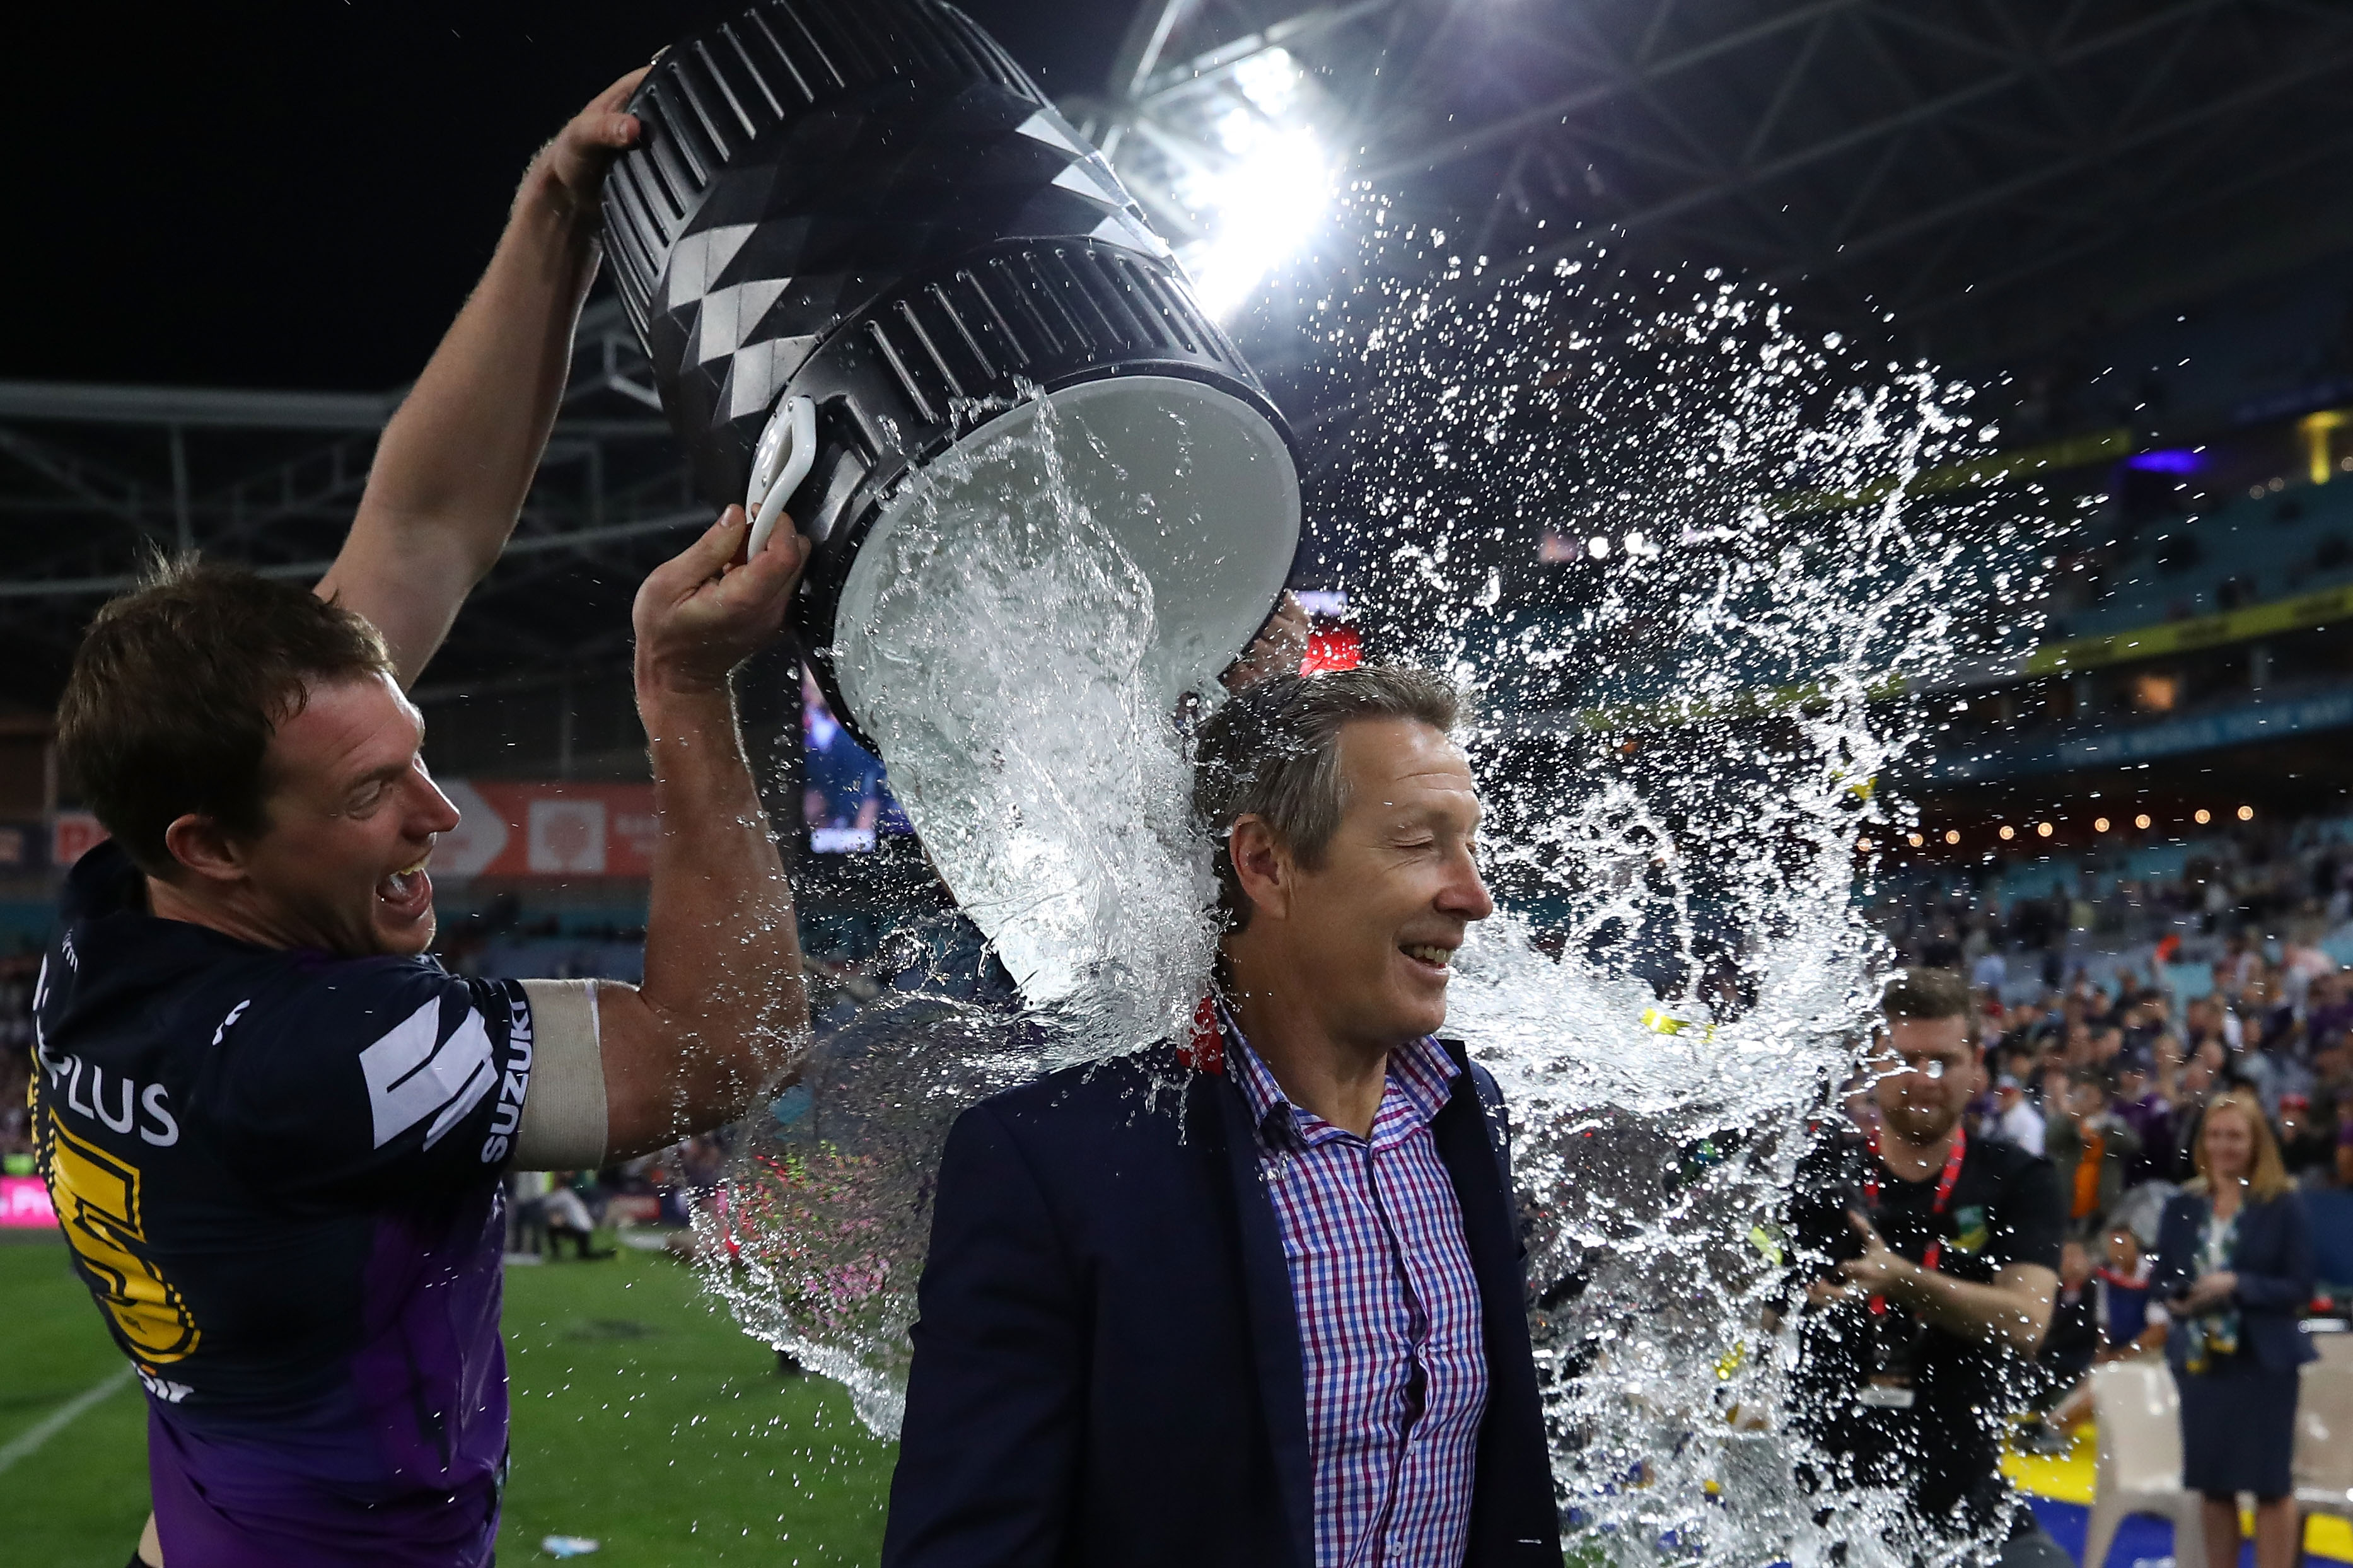 The Melbourne Storm completed a dominant season, led by coach Craig Bellamy.